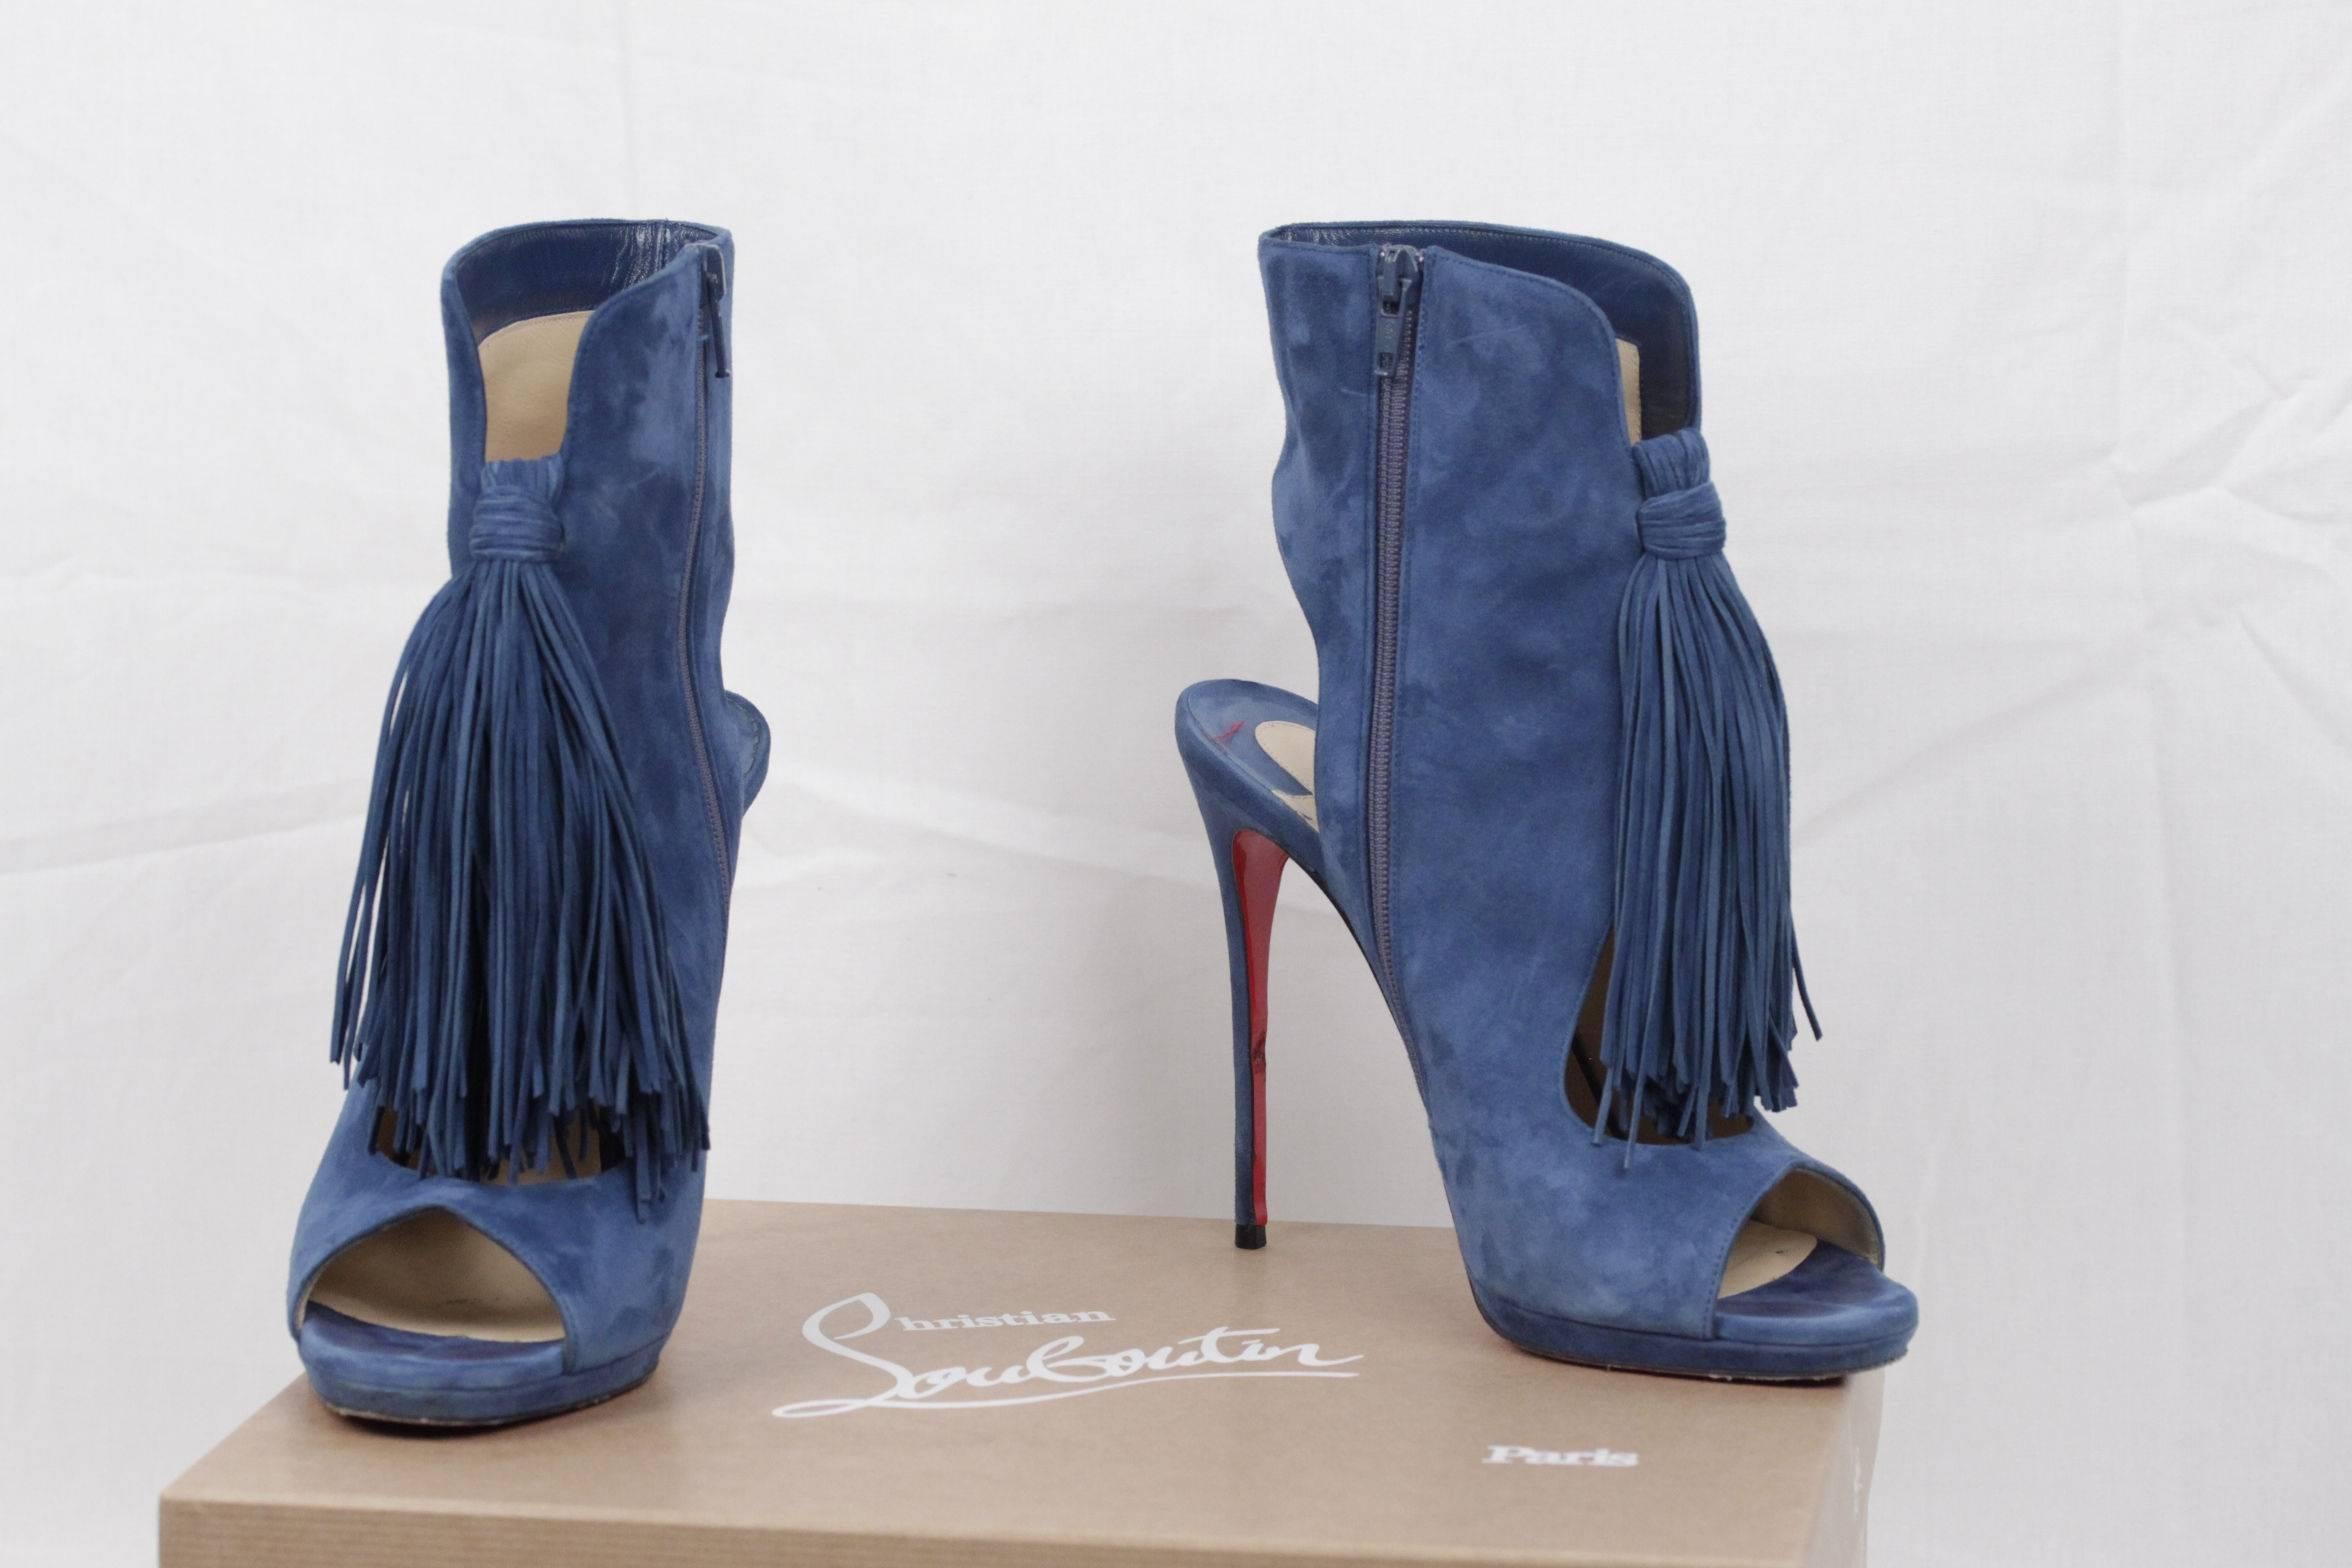  - Christian Louboutin blue suede ankle boots
- Model: Otoka 120
- Color: 'Espadon' Blue
- oversized tassel detail
- 4.8 inches - 12 cm covered stiletto heels
- Peep toe
- Glove vamp with exposed arch
- Cutout over heel
- Side zip eases